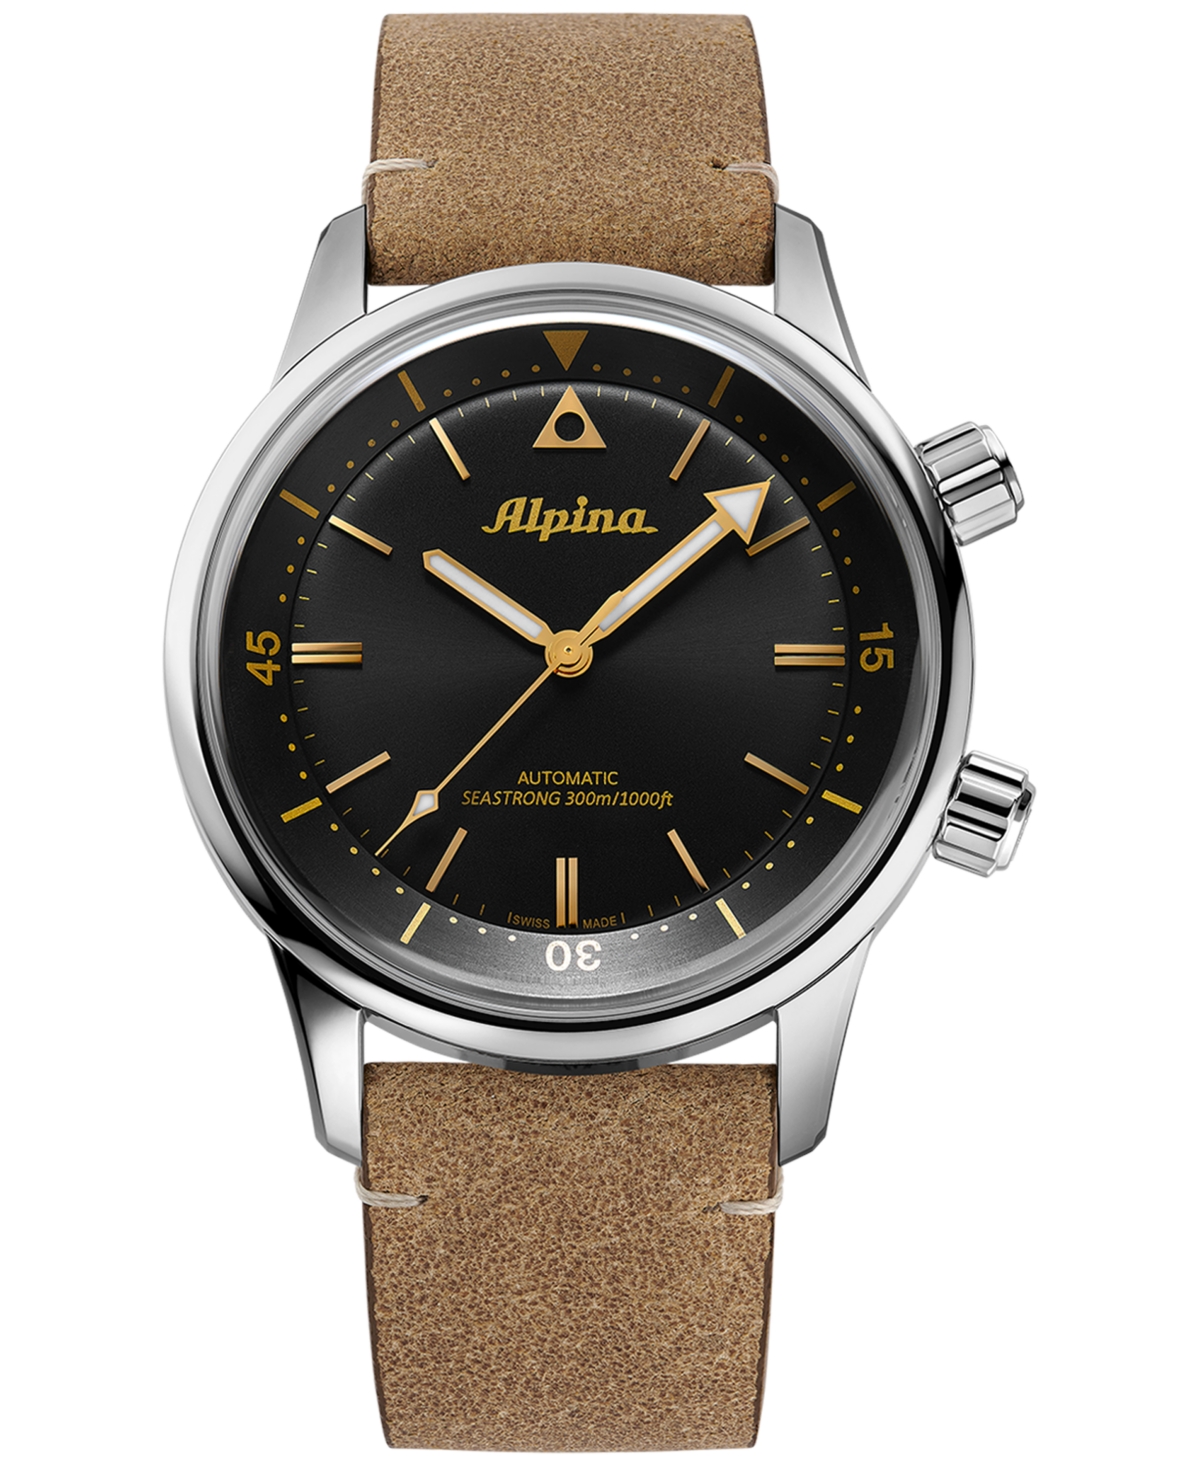 Alpina Men's Swiss Automatic Seastrong Diver Brown Leather Strap Watch 42mm